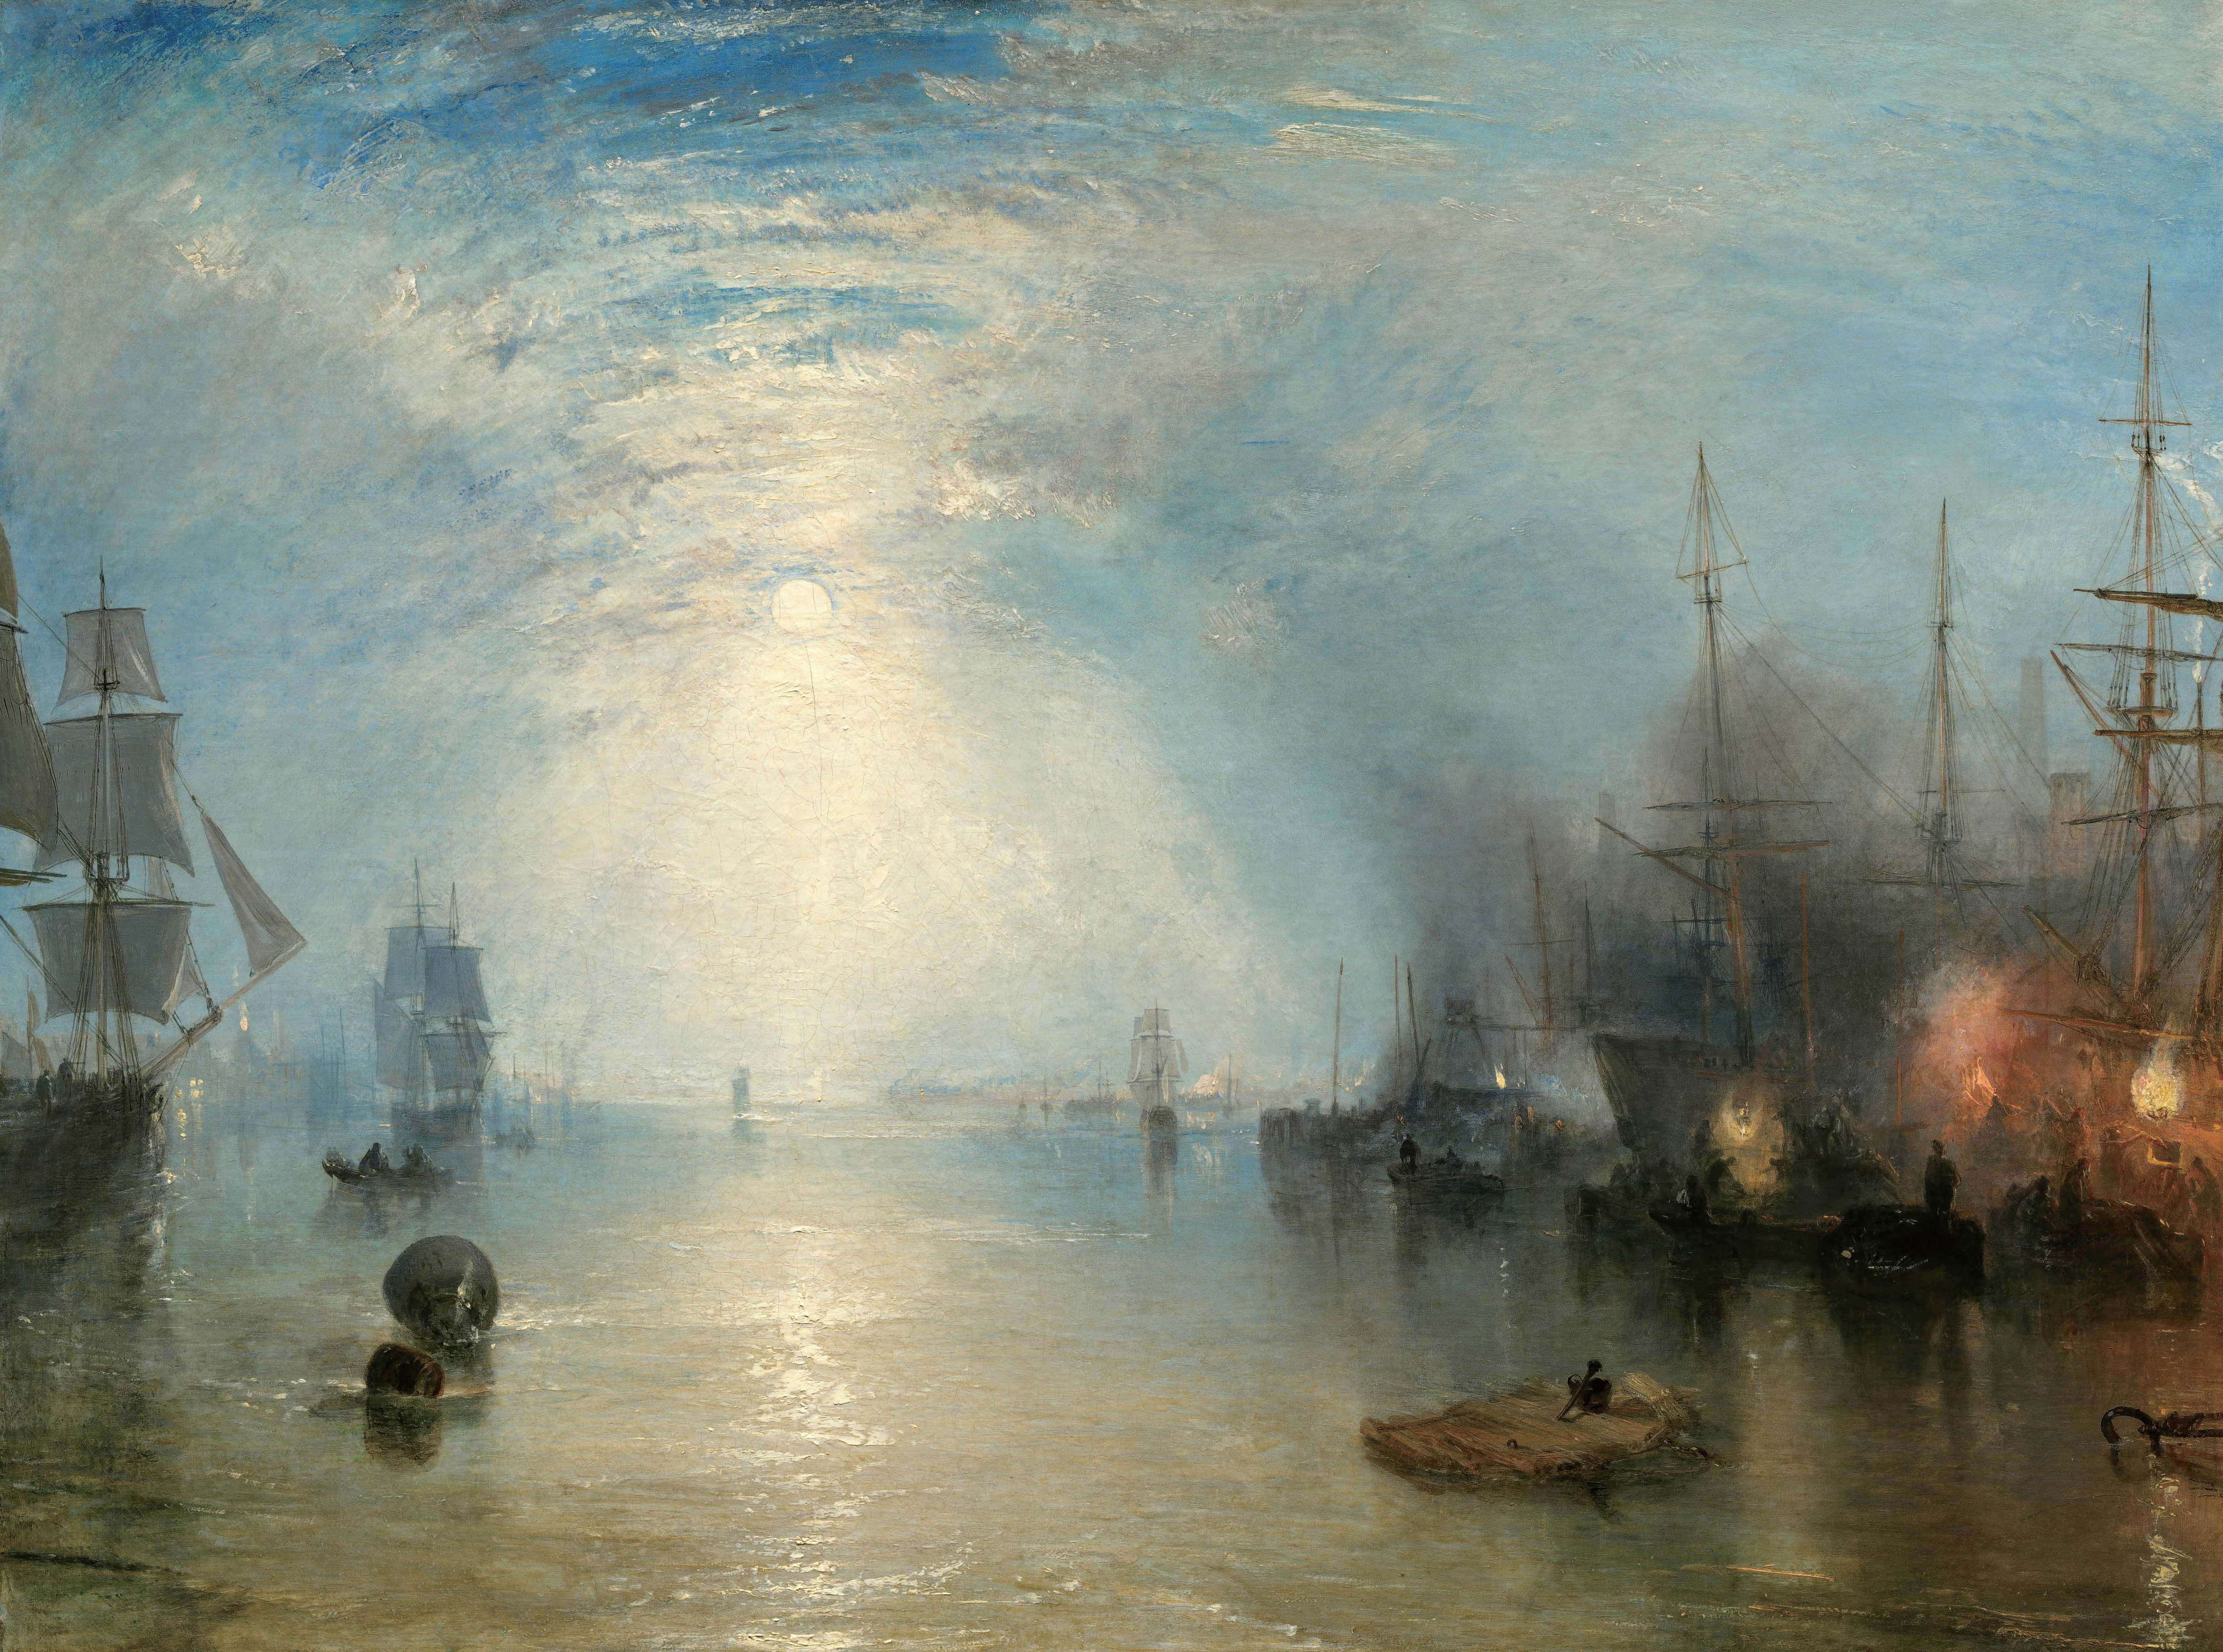 Oil On Canvas Oil Painting J M W Turner Water Artwork Classical Art Sky Clouds Boat Ship 5111x3798